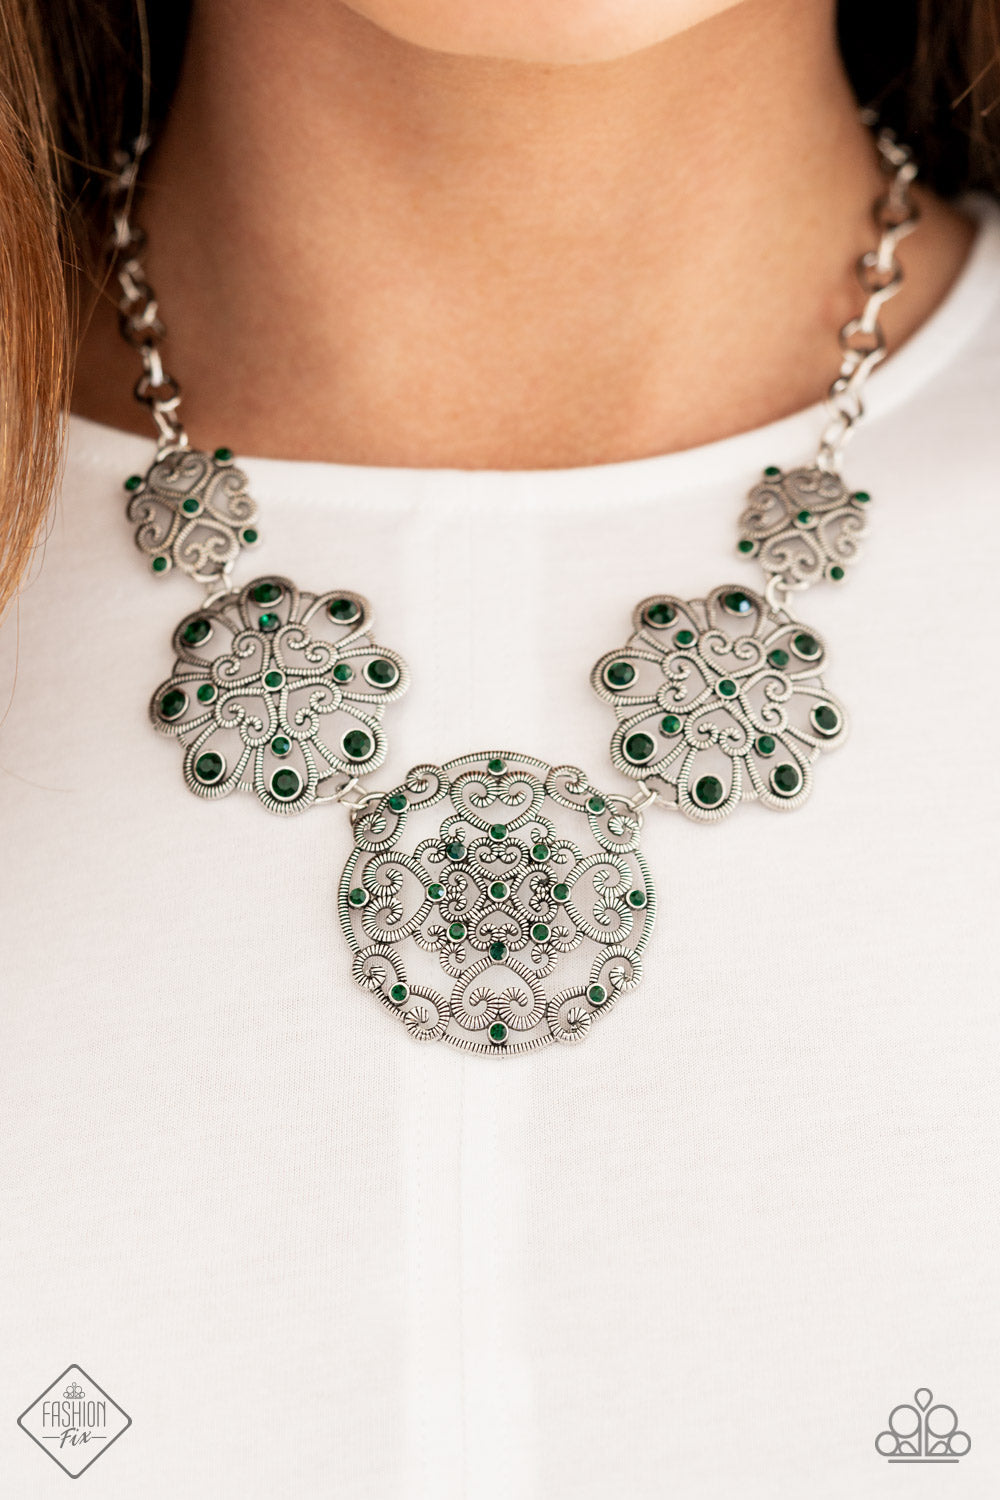 Royally Romantic - Green and Silver Necklace - Paparazzi Accessories - Exquisite heart motifs dotted with dainty emerald rhinestones coalesce into airy medallions that link to a modest silver chain for a stylish fashion necklace. Trendy fashion jewelry for everyone.